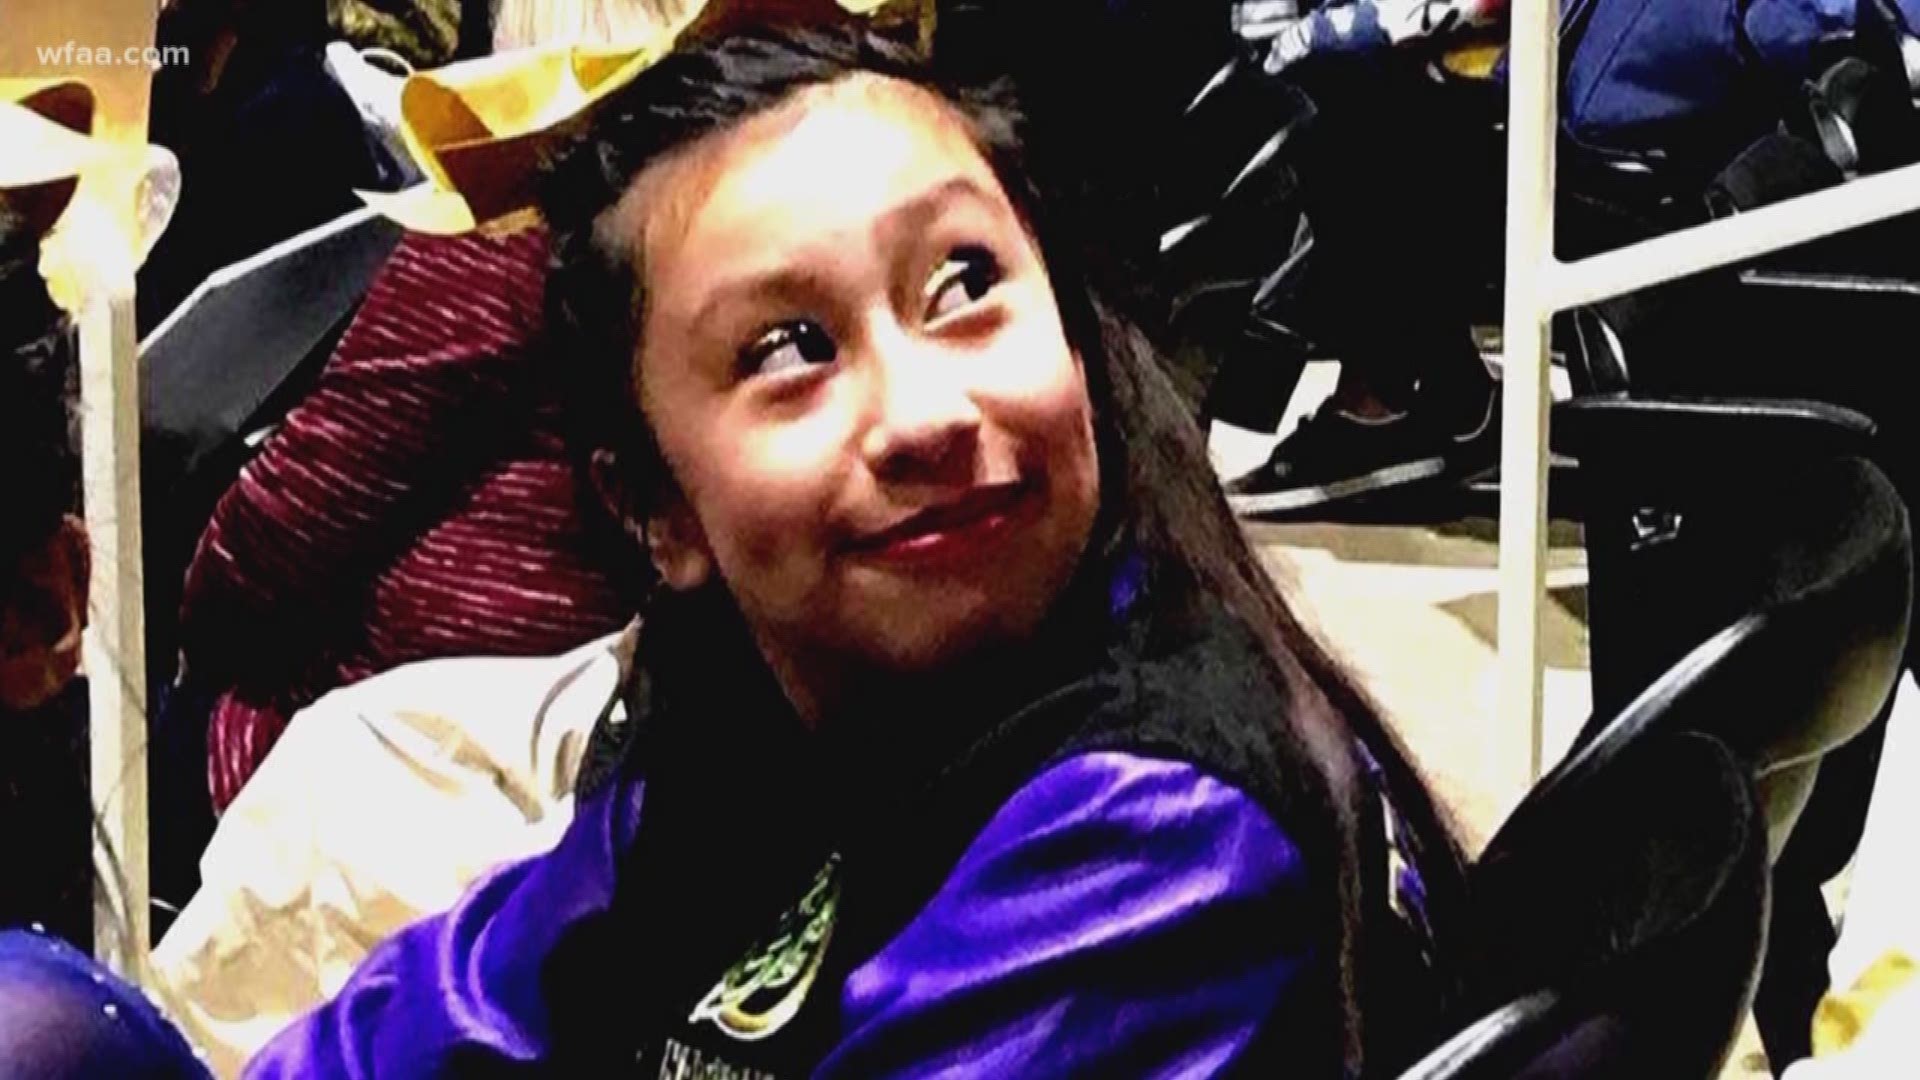 Authored by Rep. Rafael Anchia, pipeline safety bills were passed Saturday by the Texas House. The bills were "in direct response" to the death of Linda "Michellita" Rogers, 12. Rogers was killed in a gas explosion at her Dallas home on Feb. 23, 2018.